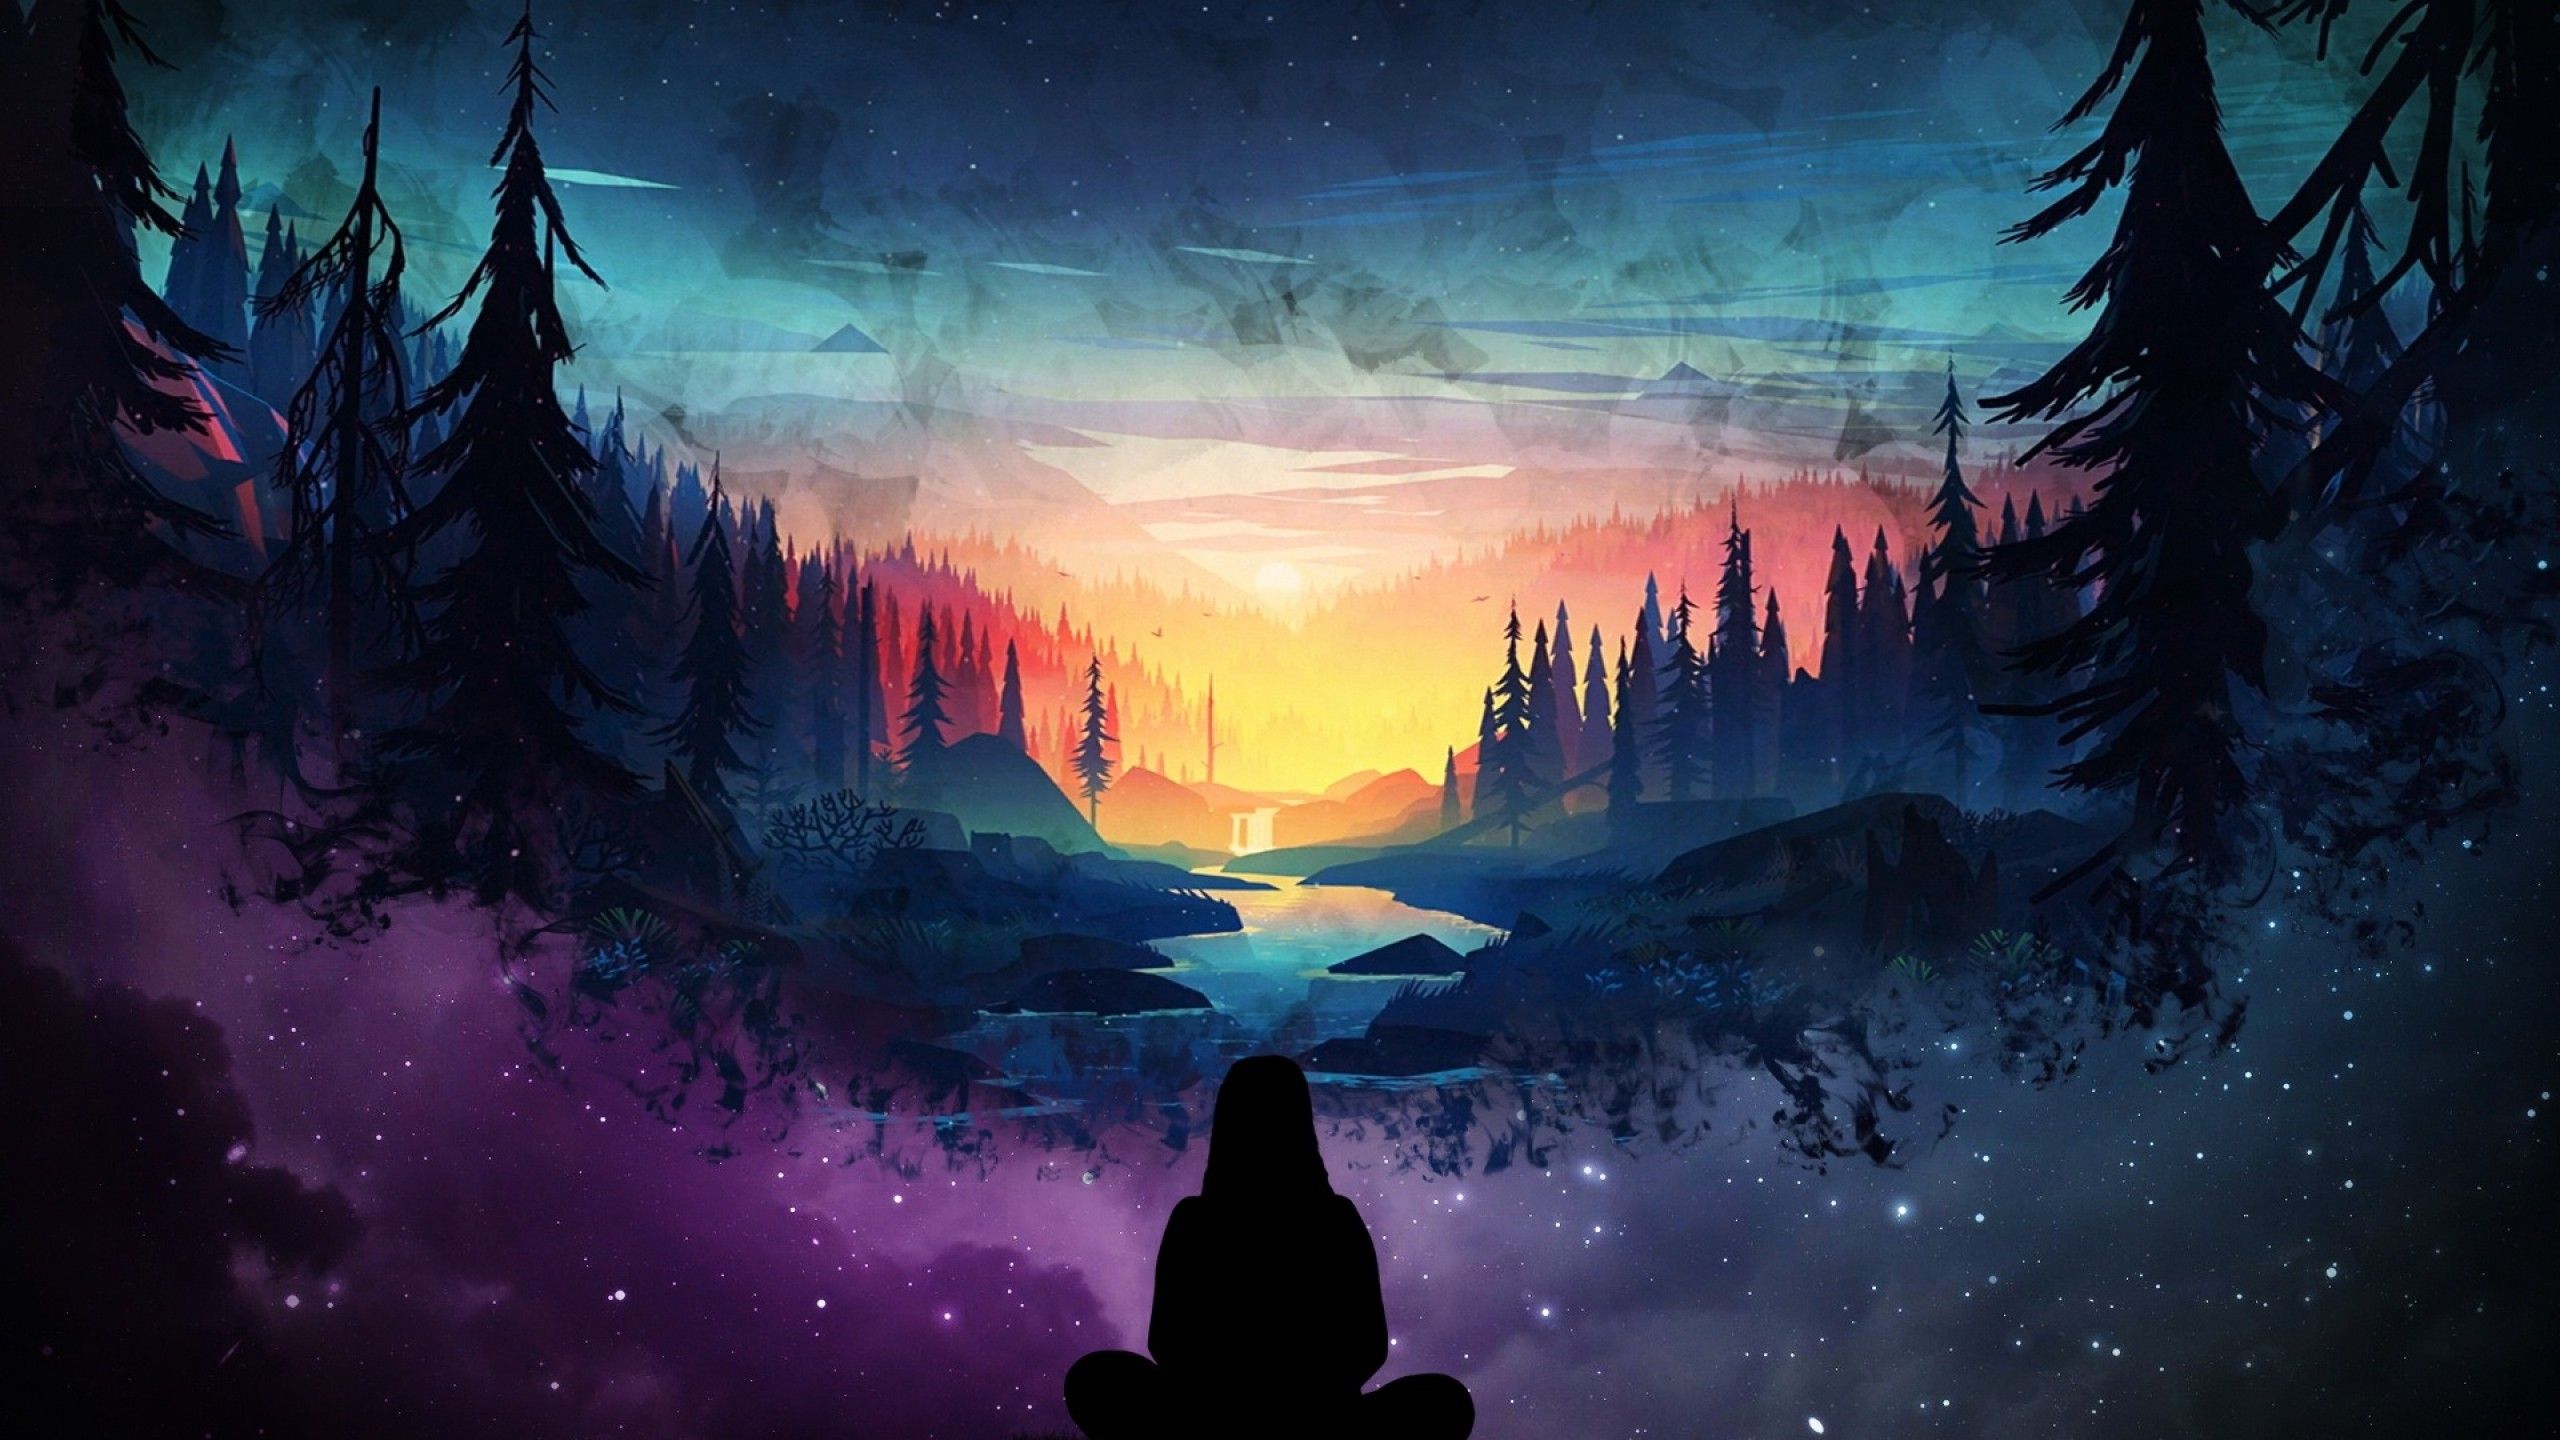 Download 2560x1440 River, Girl, Silhouette, Forest, Scenic, Stars, Two Dimensions, Digital Art Wallpaper for iMac 27 inch